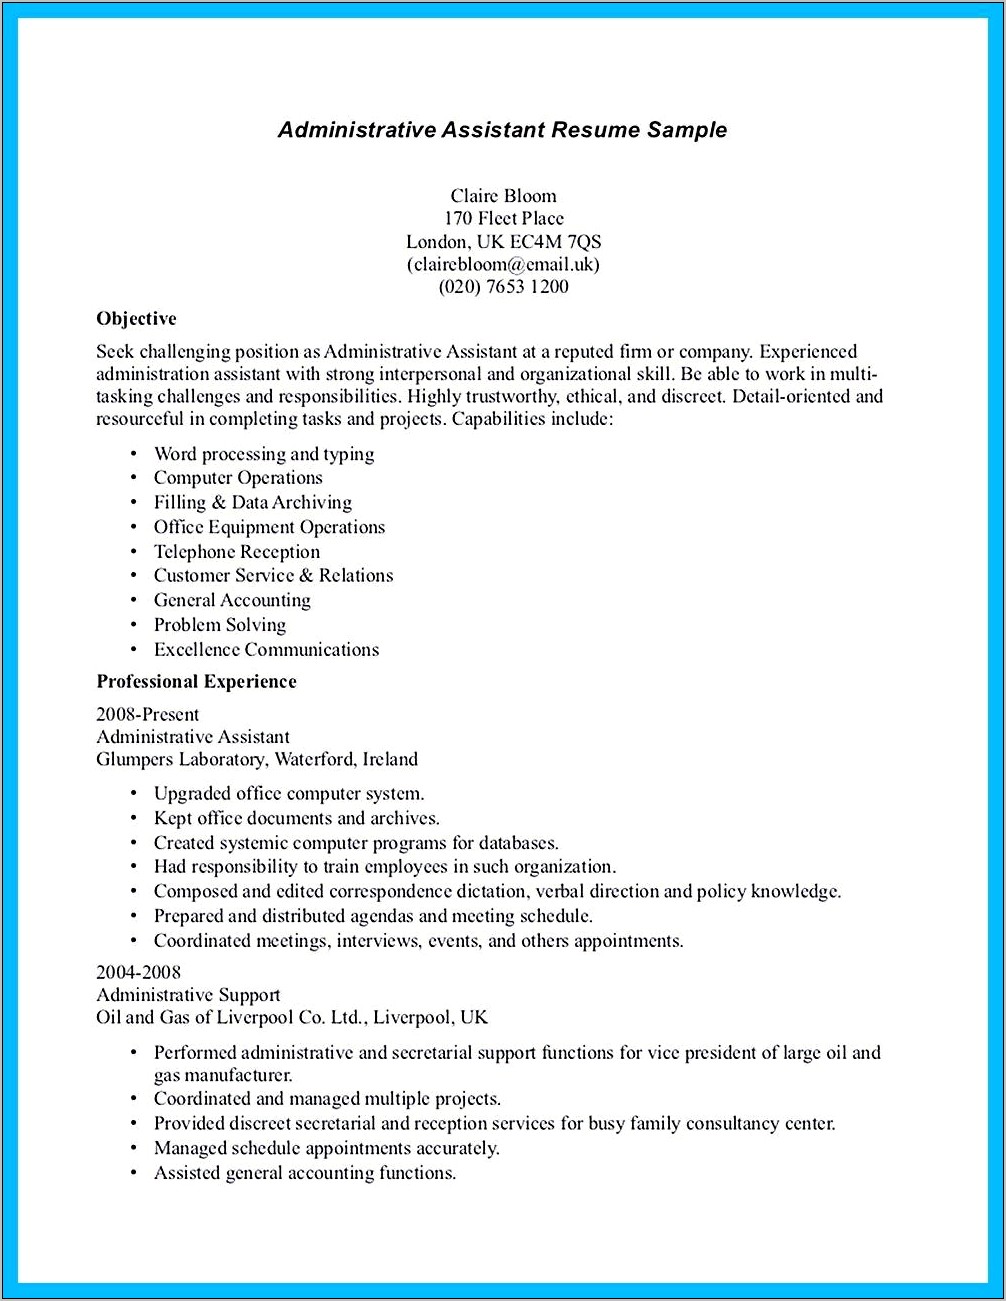 Resume Objective Statement Examples For Administrative Assistant